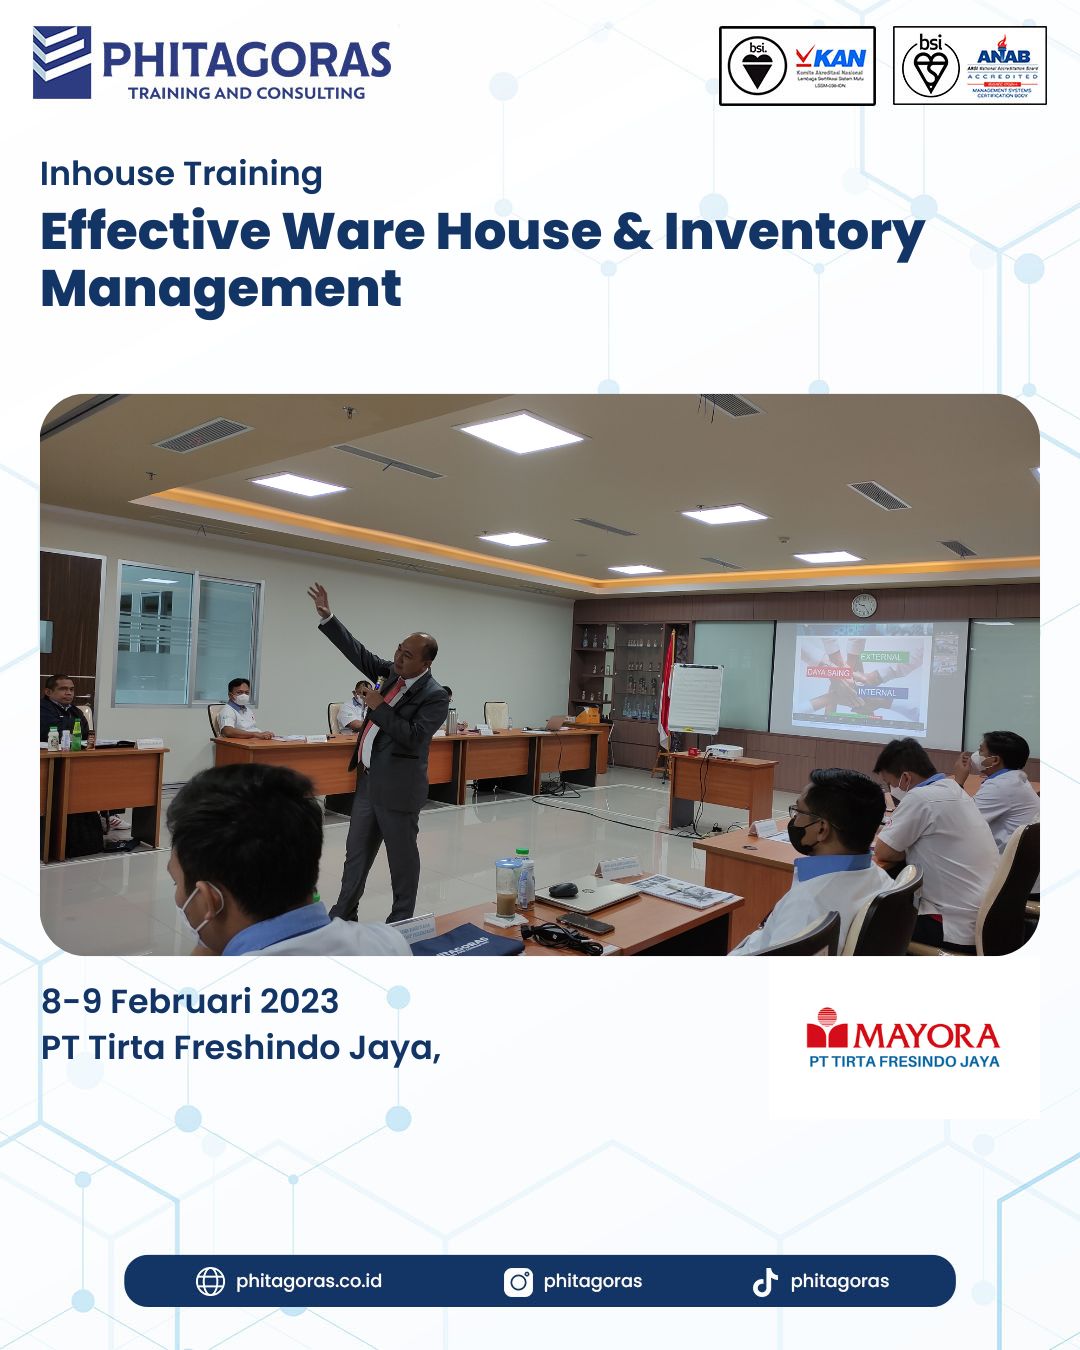 Training Effective Ware House & Inventory Management